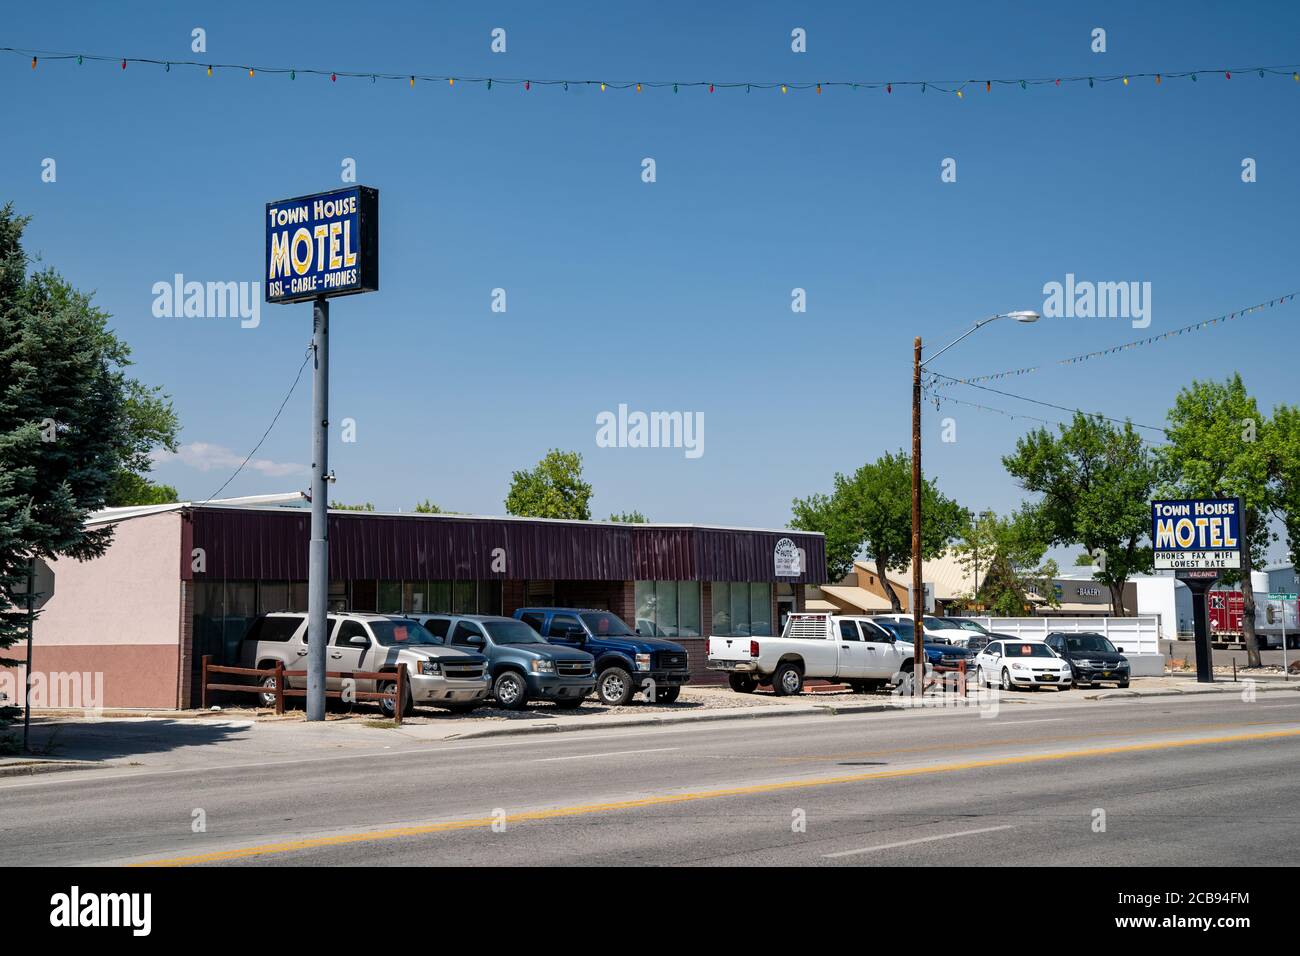 Worland, Wyoming - July 25, 2020: Sign for the Town House Motel, offering outdated amenities such as DSL, landline phones, and fax machines Stock Photo